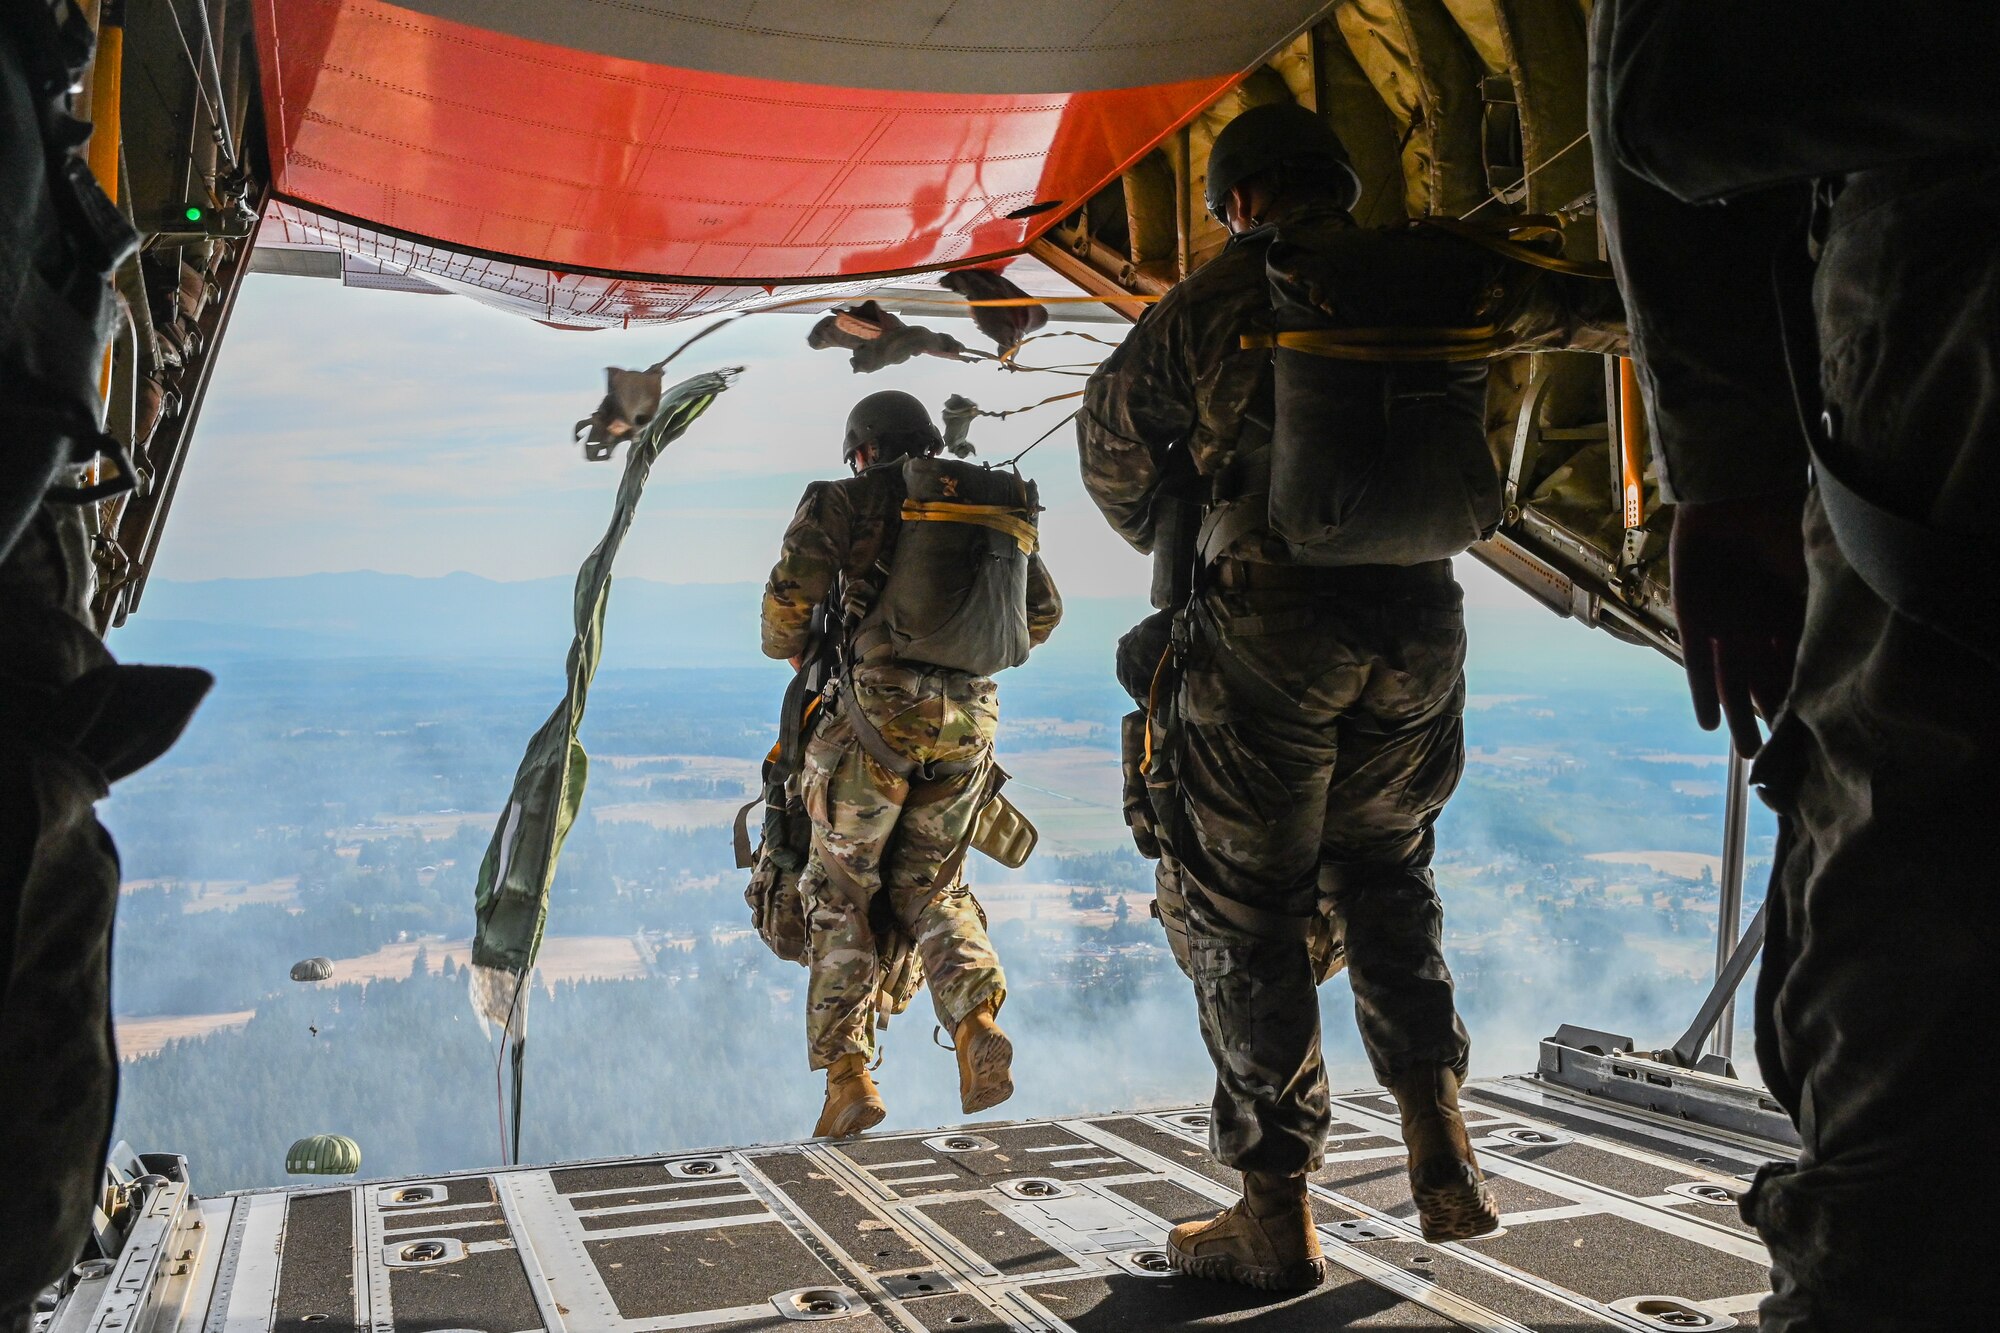 Paratroopers jump off a plane.